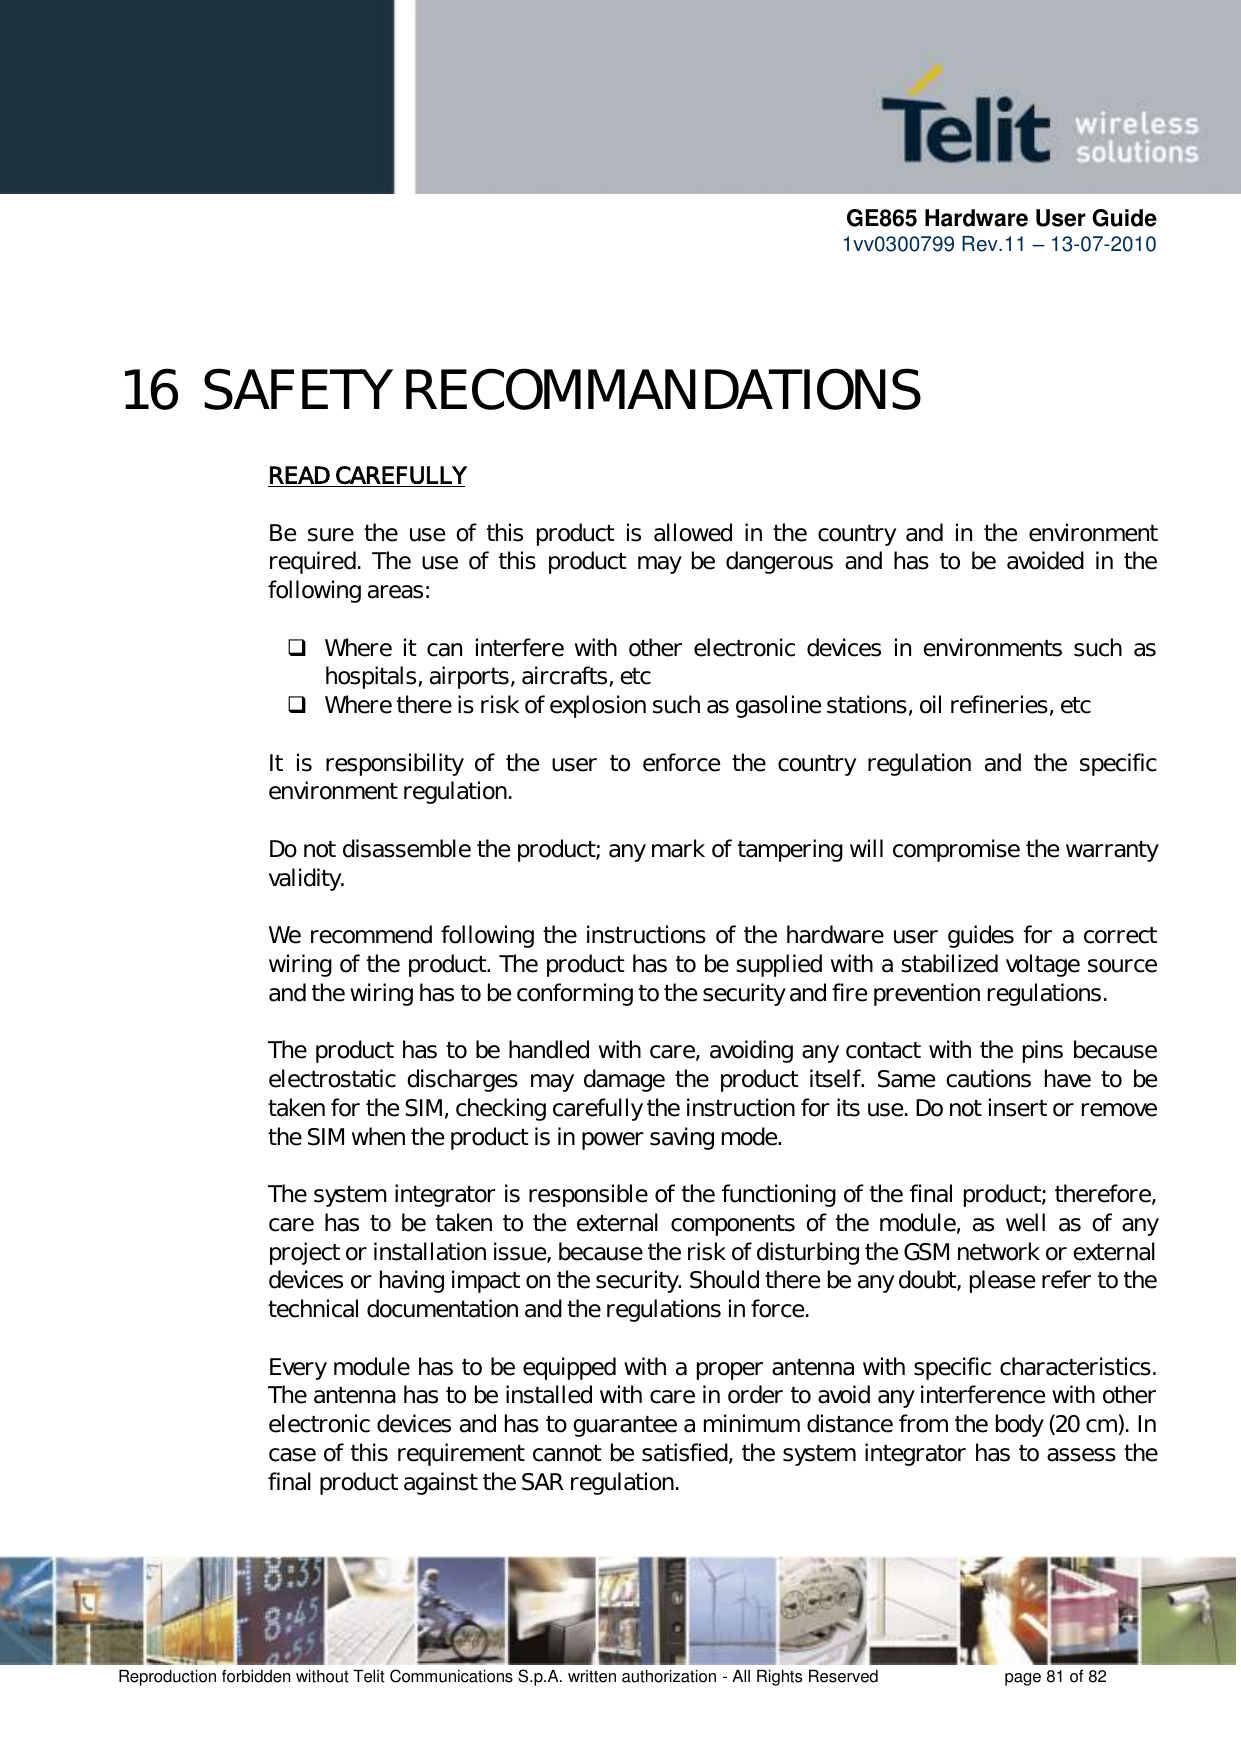      GE865 Hardware User Guide 1vv0300799 Rev.11 – 13-07-2010       Reproduction forbidden without Telit Communications S.p.A. written authorization - All Rights Reserved    page 81 of 82  16 SAFETY RECOMMANDATIONS READ CAREFULLY  Be  sure  the  use  of  this  product  is  allowed  in  the  country  and  in  the  environment required.  The  use of  this product  may be  dangerous  and  has  to  be  avoided  in  the following areas:   Where  it  can  interfere with  other  electronic  devices  in  environments  such  as hospitals, airports, aircrafts, etc  Where there is risk of explosion such as gasoline stations, oil refineries, etc   It  is  responsibility  of  the  user  to  enforce  the  country  regulation  and  the  specific environment regulation.  Do not disassemble the product; any mark of tampering will compromise the warranty validity.  We recommend following the instructions of the hardware user guides for a correct wiring of the product. The product has to be supplied with a stabilized voltage source and the wiring has to be conforming to the security and fire prevention regulations.  The product has to be handled with care, avoiding any contact with the pins because electrostatic  discharges  may  damage  the  product  itself.  Same  cautions  have  to  be taken for the SIM, checking carefully the instruction for its use. Do not insert or remove the SIM when the product is in power saving mode.  The system integrator is responsible of the functioning of the final product; therefore, care has to be  taken to the external components of the module, as well as of  any project or installation issue, because the risk of disturbing the GSM network or external devices or having impact on the security. Should there be any doubt, please refer to the technical documentation and the regulations in force.  Every module has to be equipped with a proper antenna with specific characteristics. The antenna has to be installed with care in order to avoid any interference with other electronic devices and has to guarantee a minimum distance from the body (20 cm). In case of this requirement cannot be satisfied, the system integrator has to assess the final product against the SAR regulation.  